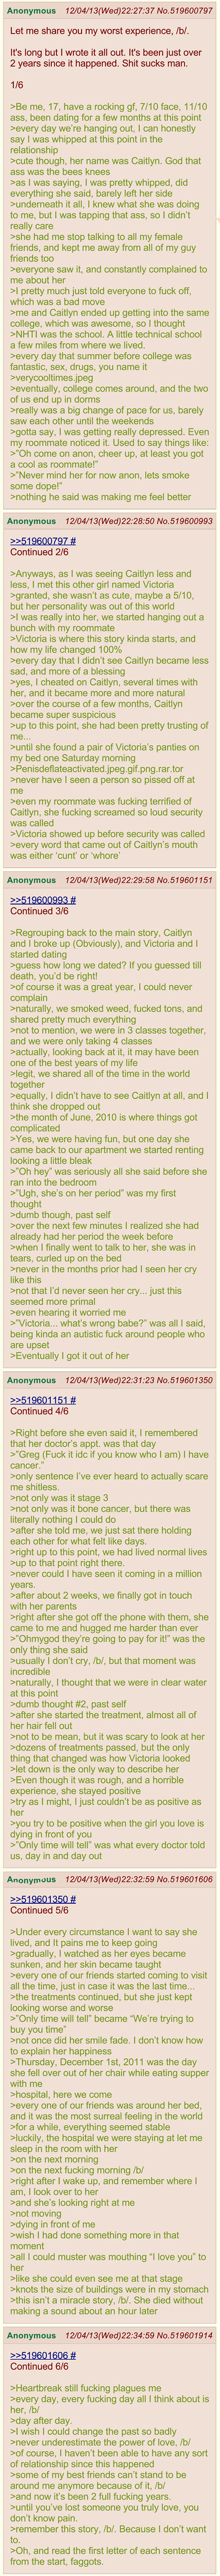 4chan delivers the ultimate love-story post...I almost cried...